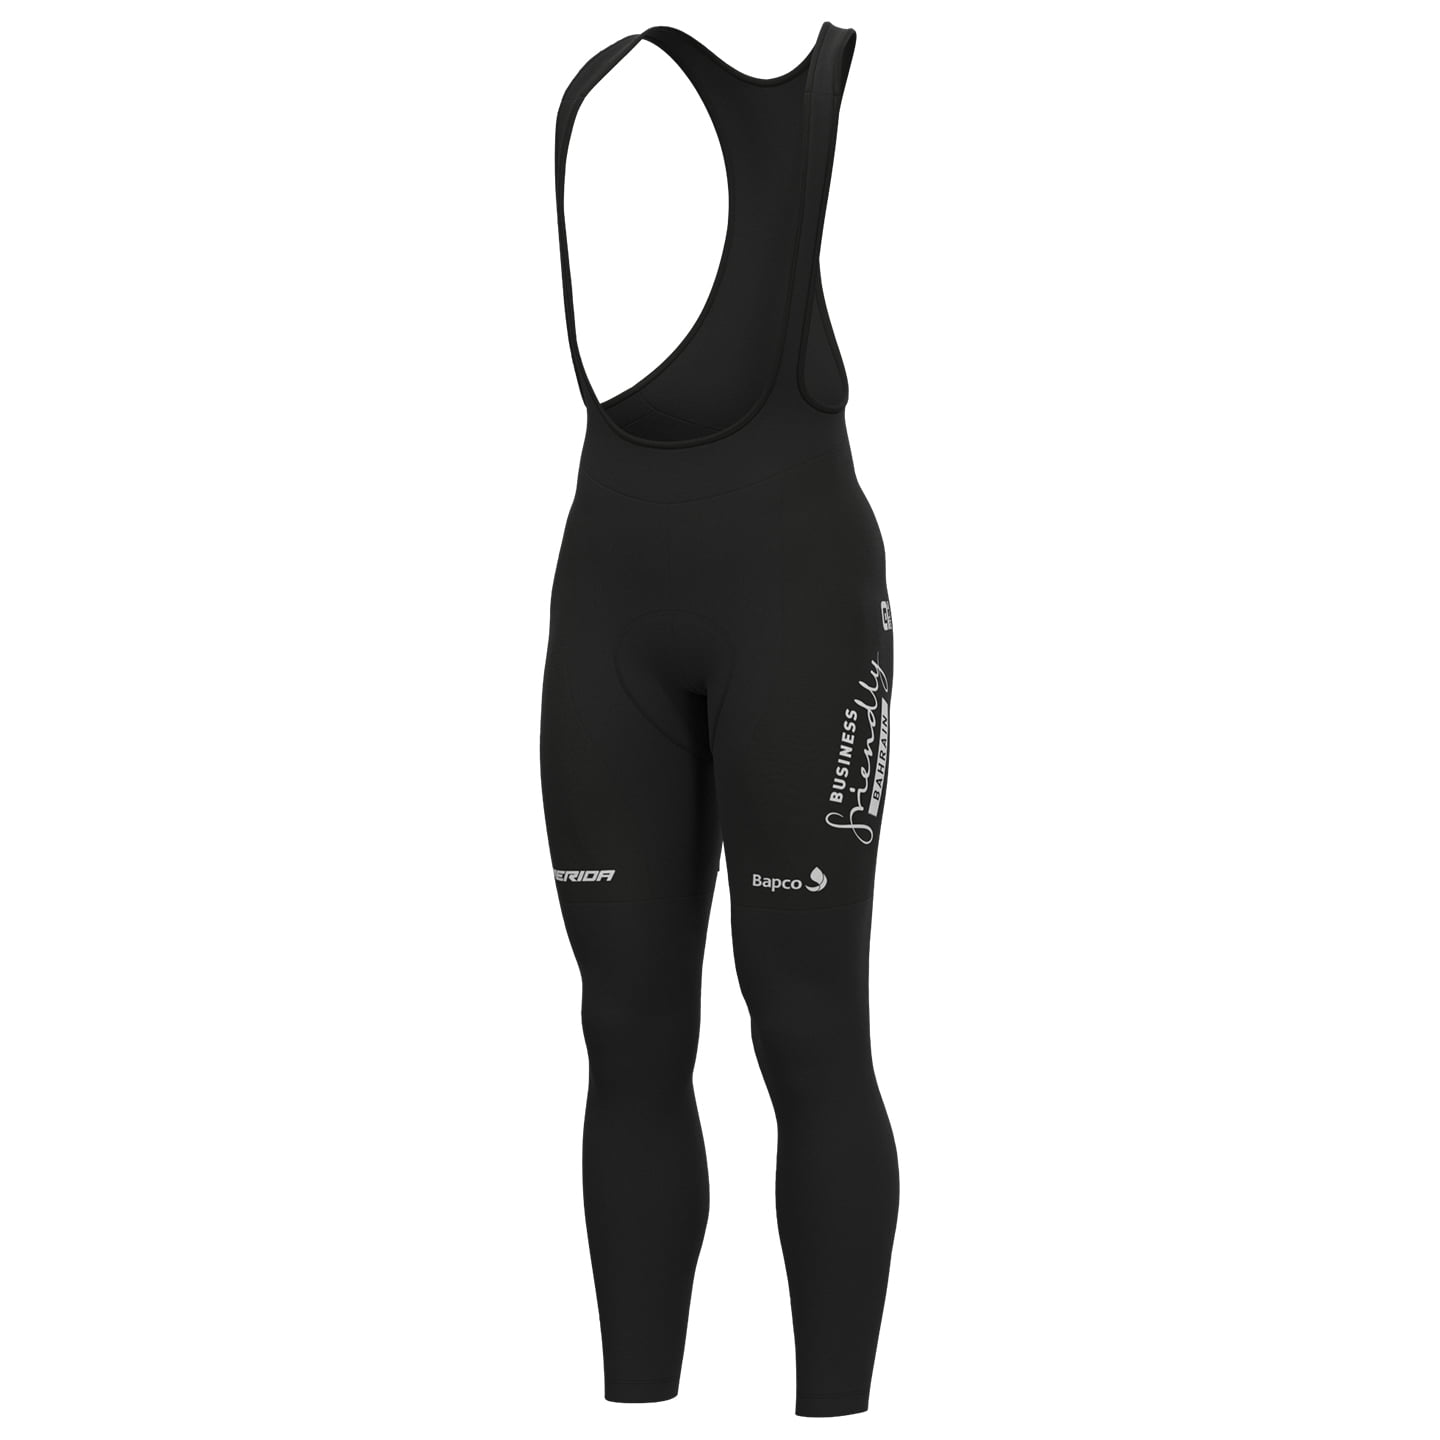 BAHRAIN - VICTORIOUS 2023 Bib Tights, for men, size 2XL, Cycle trousers, Cycle gear